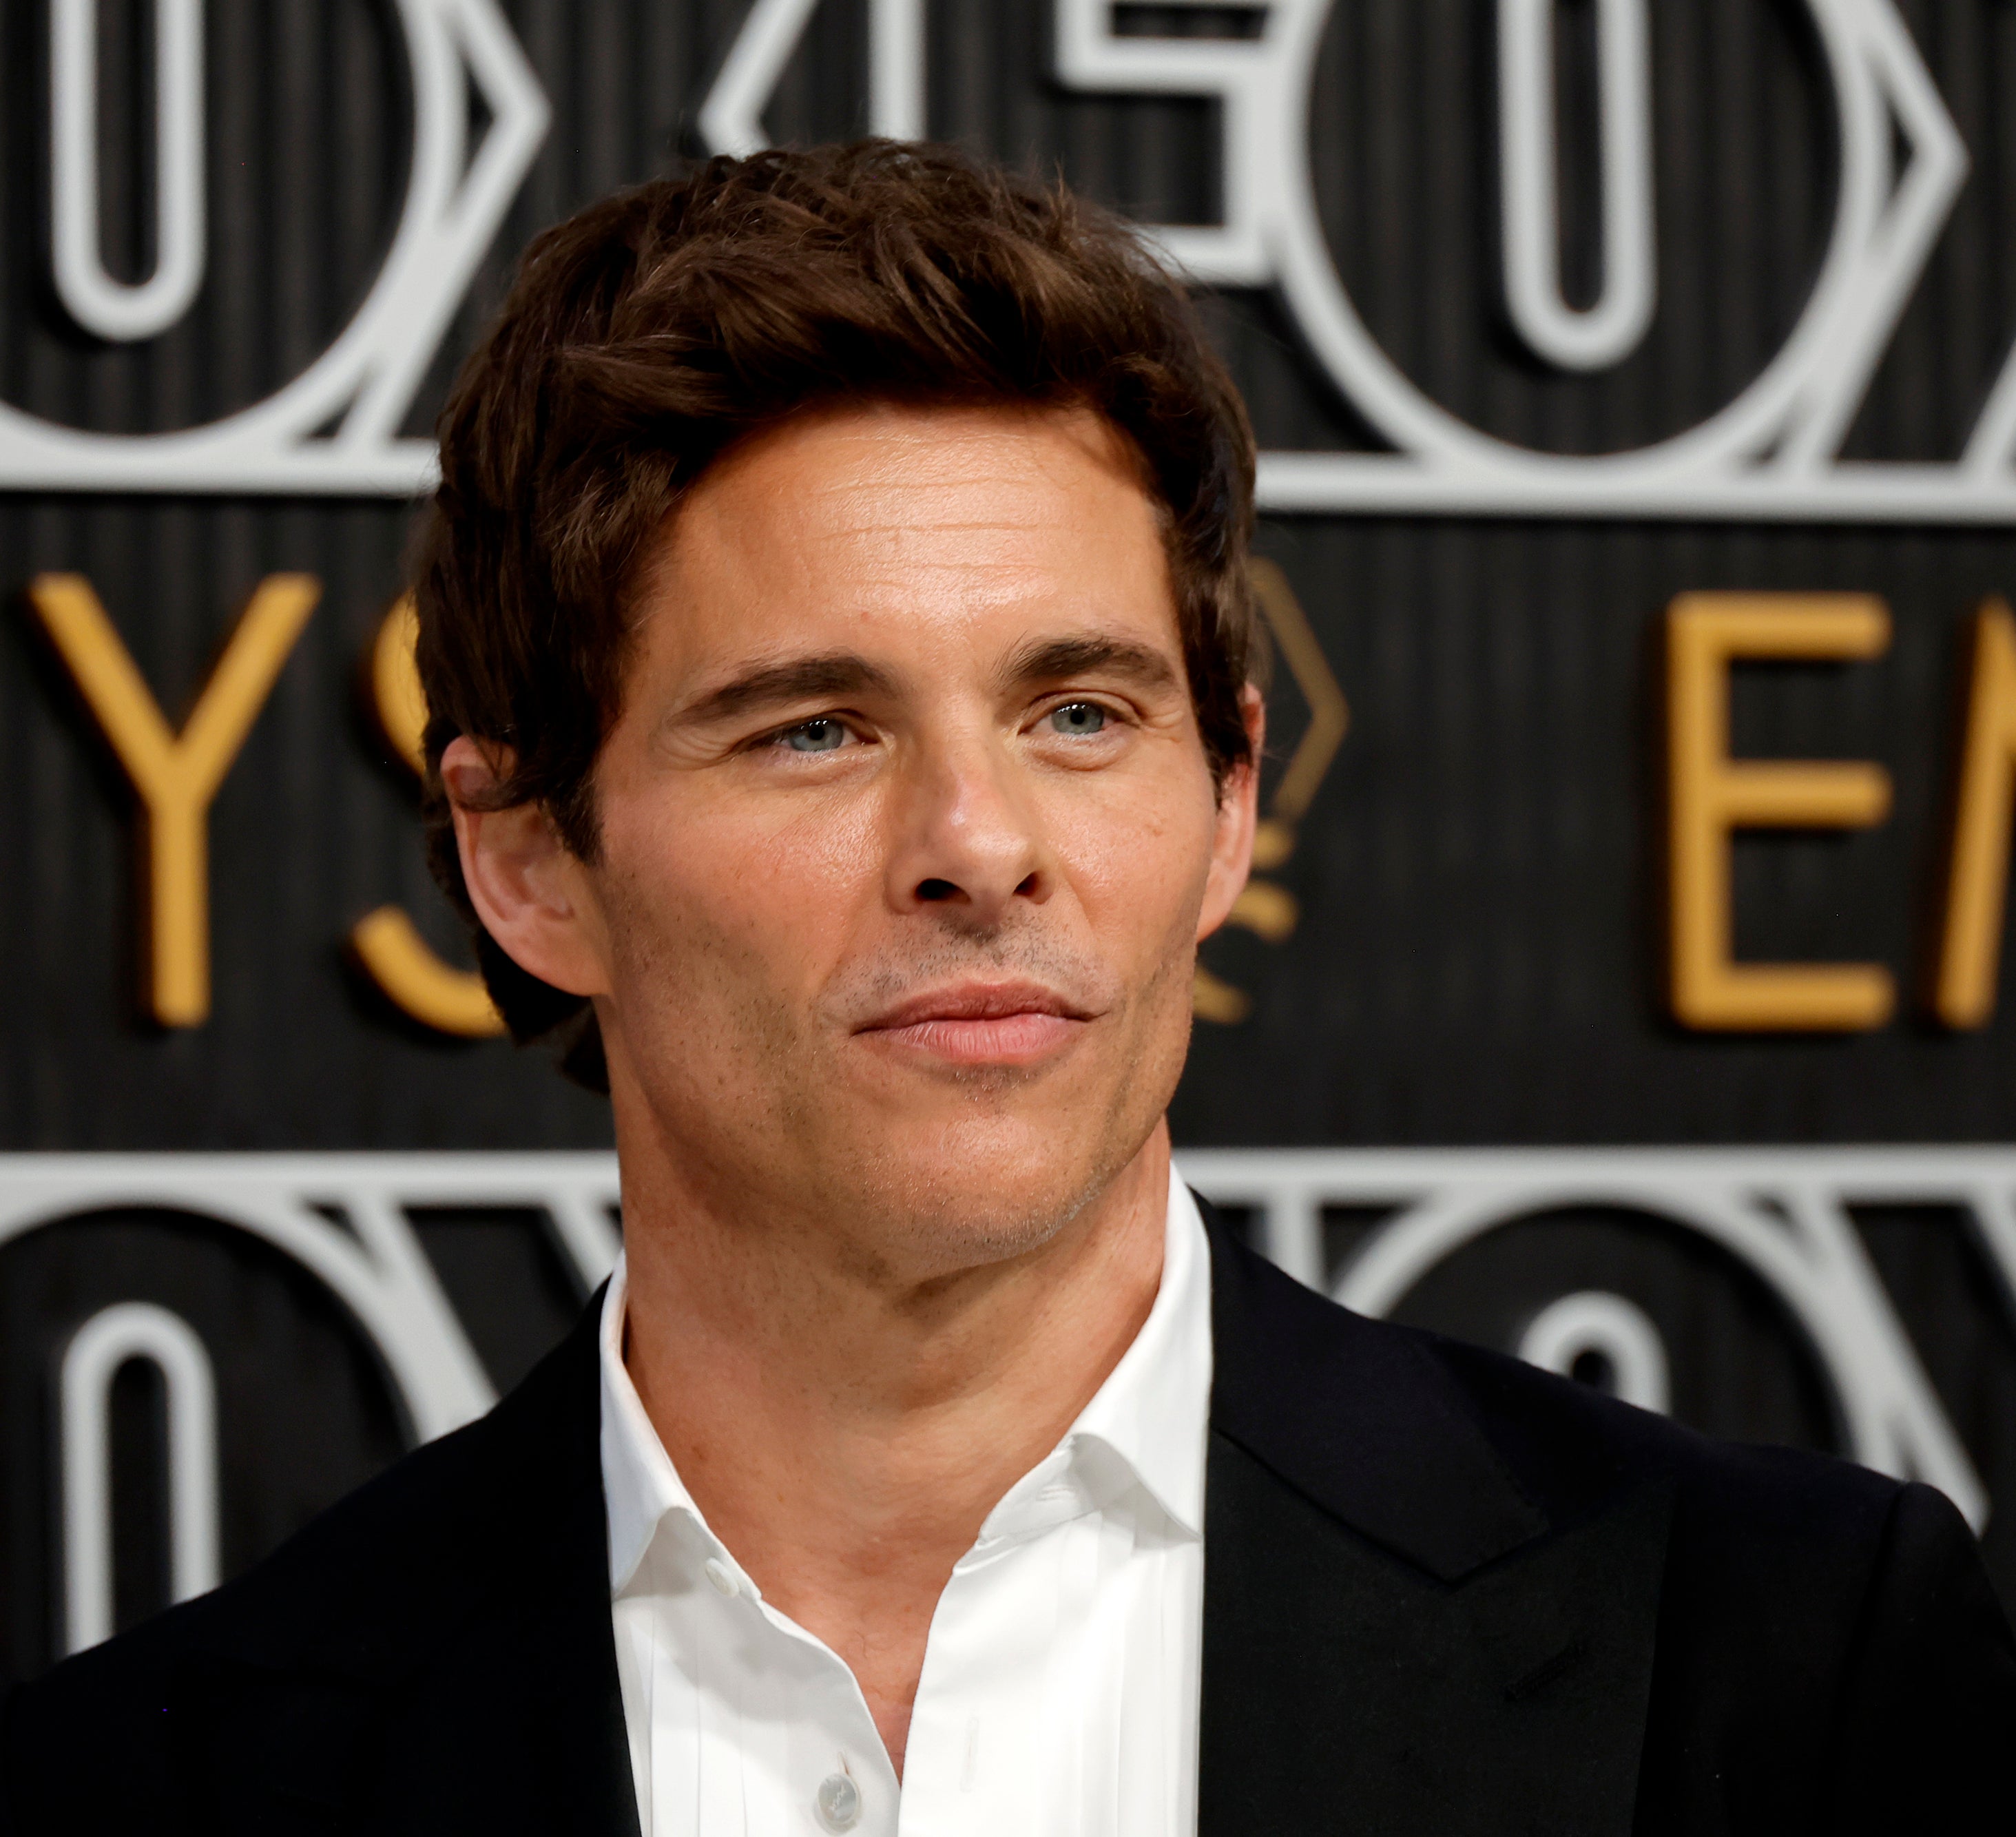 James Marsden wearing a classic suit on the Emmys red carpet